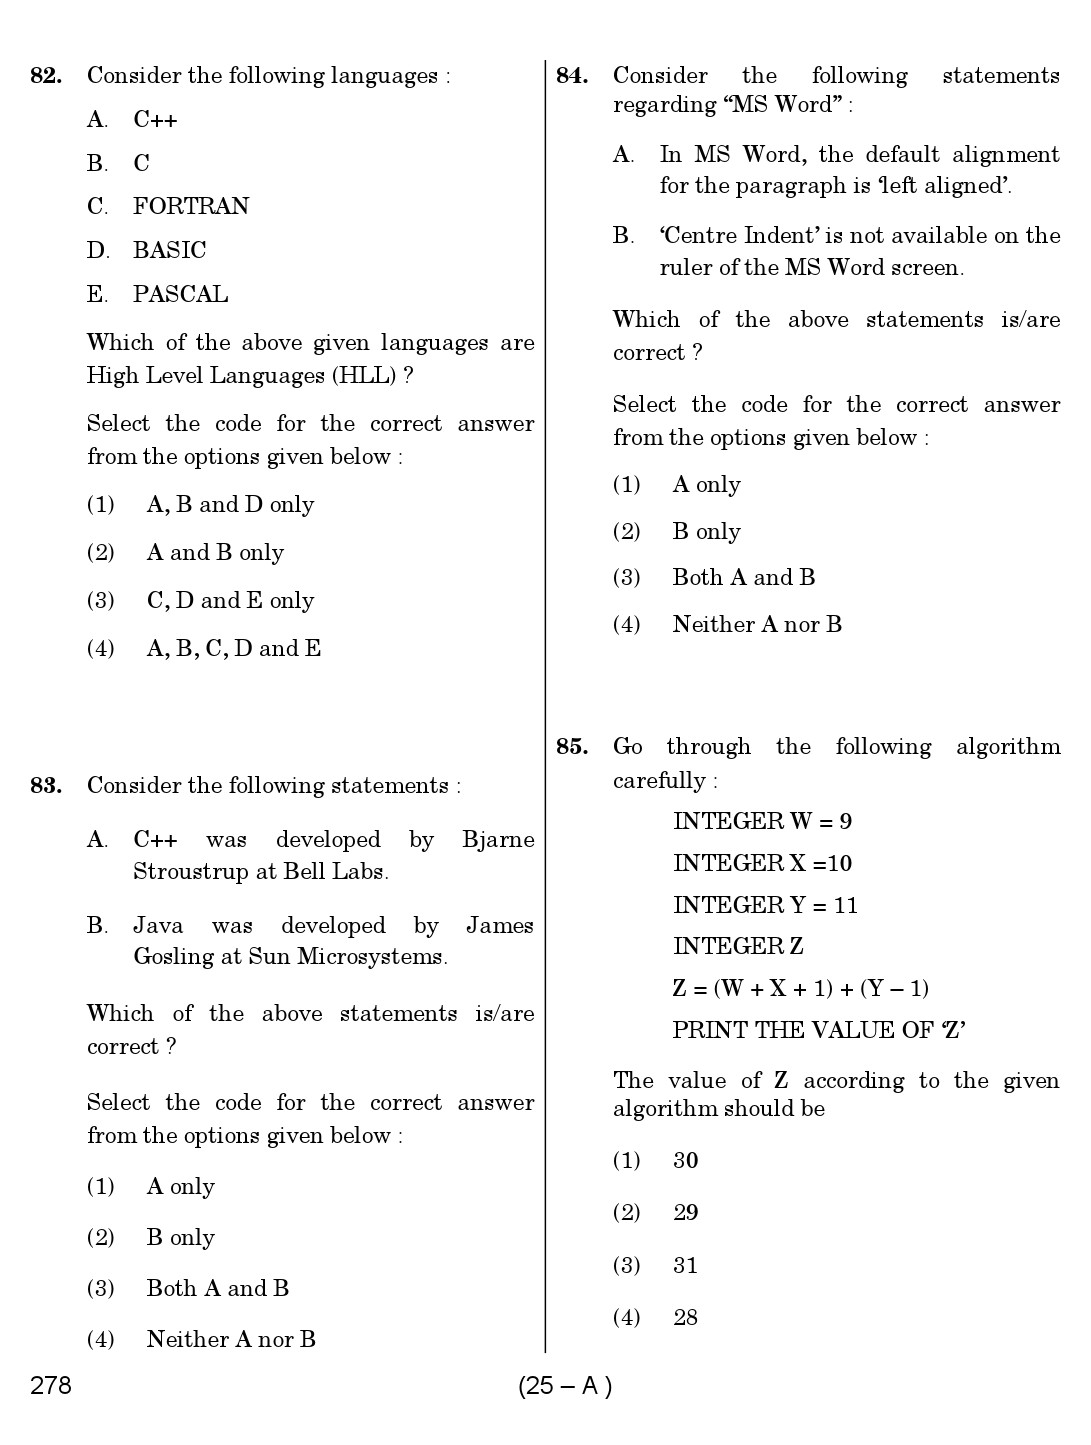 Karnataka PSC First Division Computer Assistants Exam Sample Question Paper 278 25